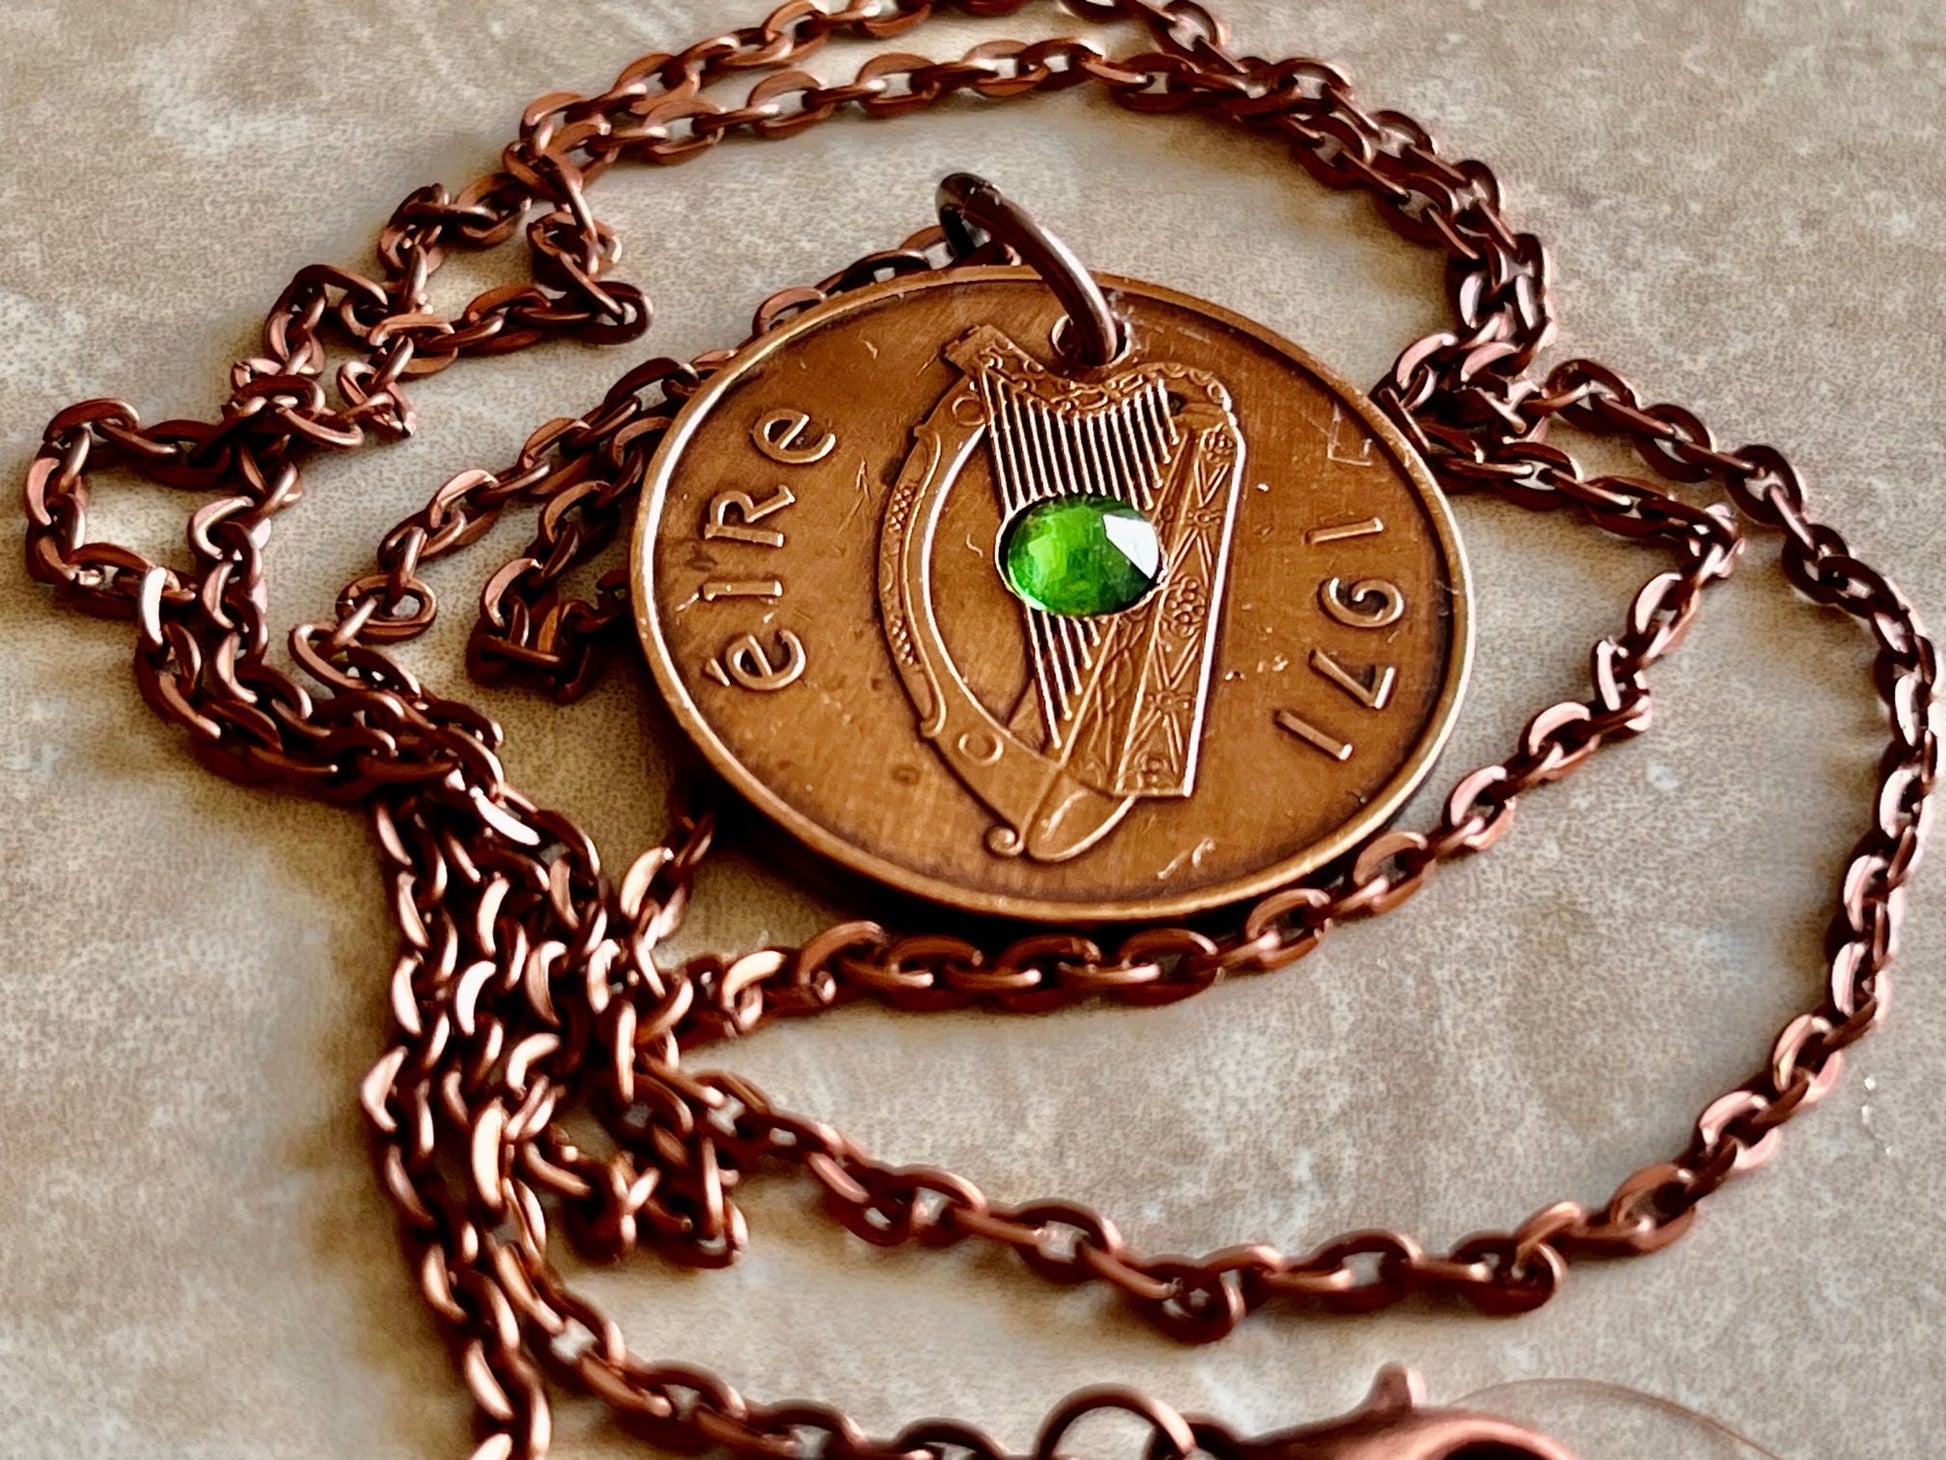 Ireland Coin Pendant 2 Pence Irish Harp Coin Necklace Rhinestone Gift For Friend Coin Charm Gift For Him, Her, Coin Collector, World Coins